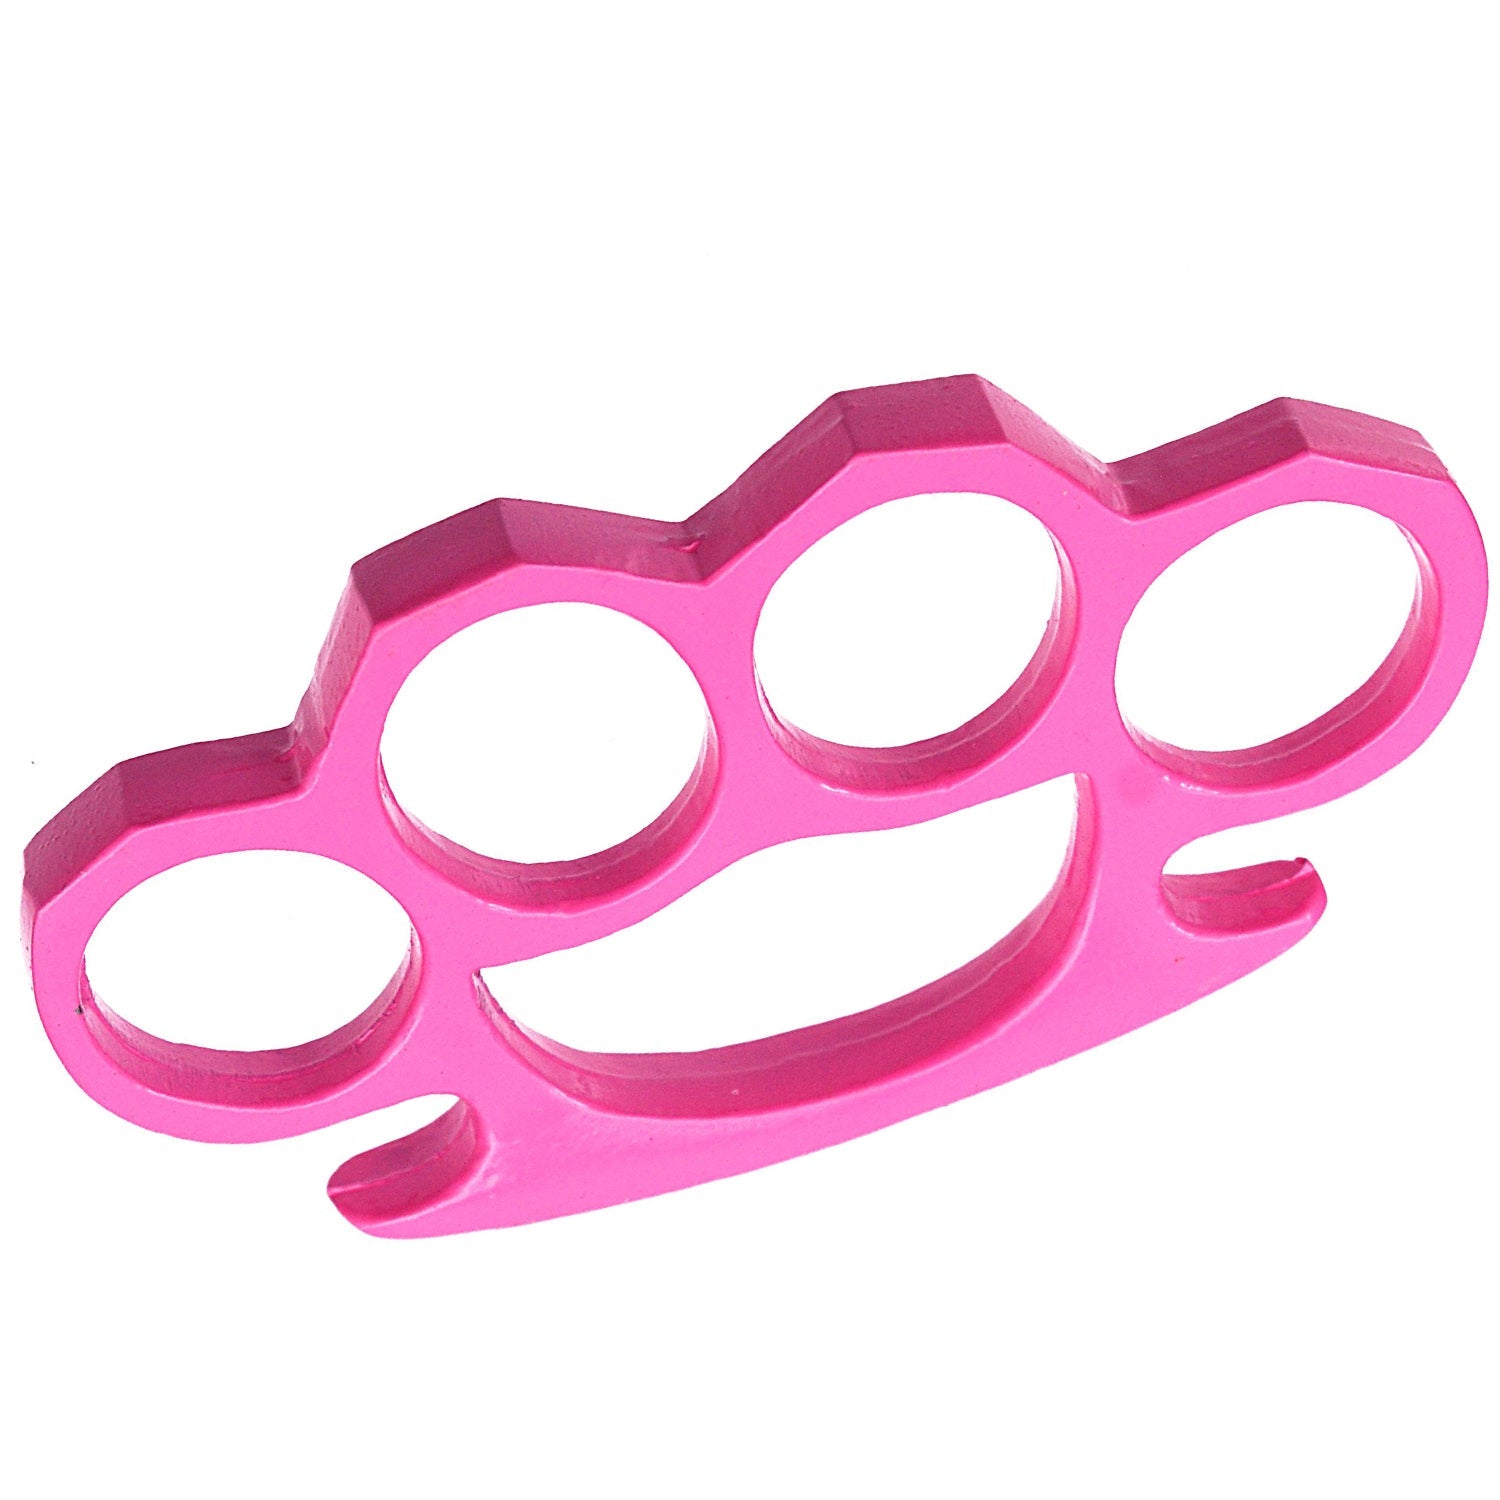 Diana Brass Knuckle - Pink - Blades For Babes - Knuckles - 1